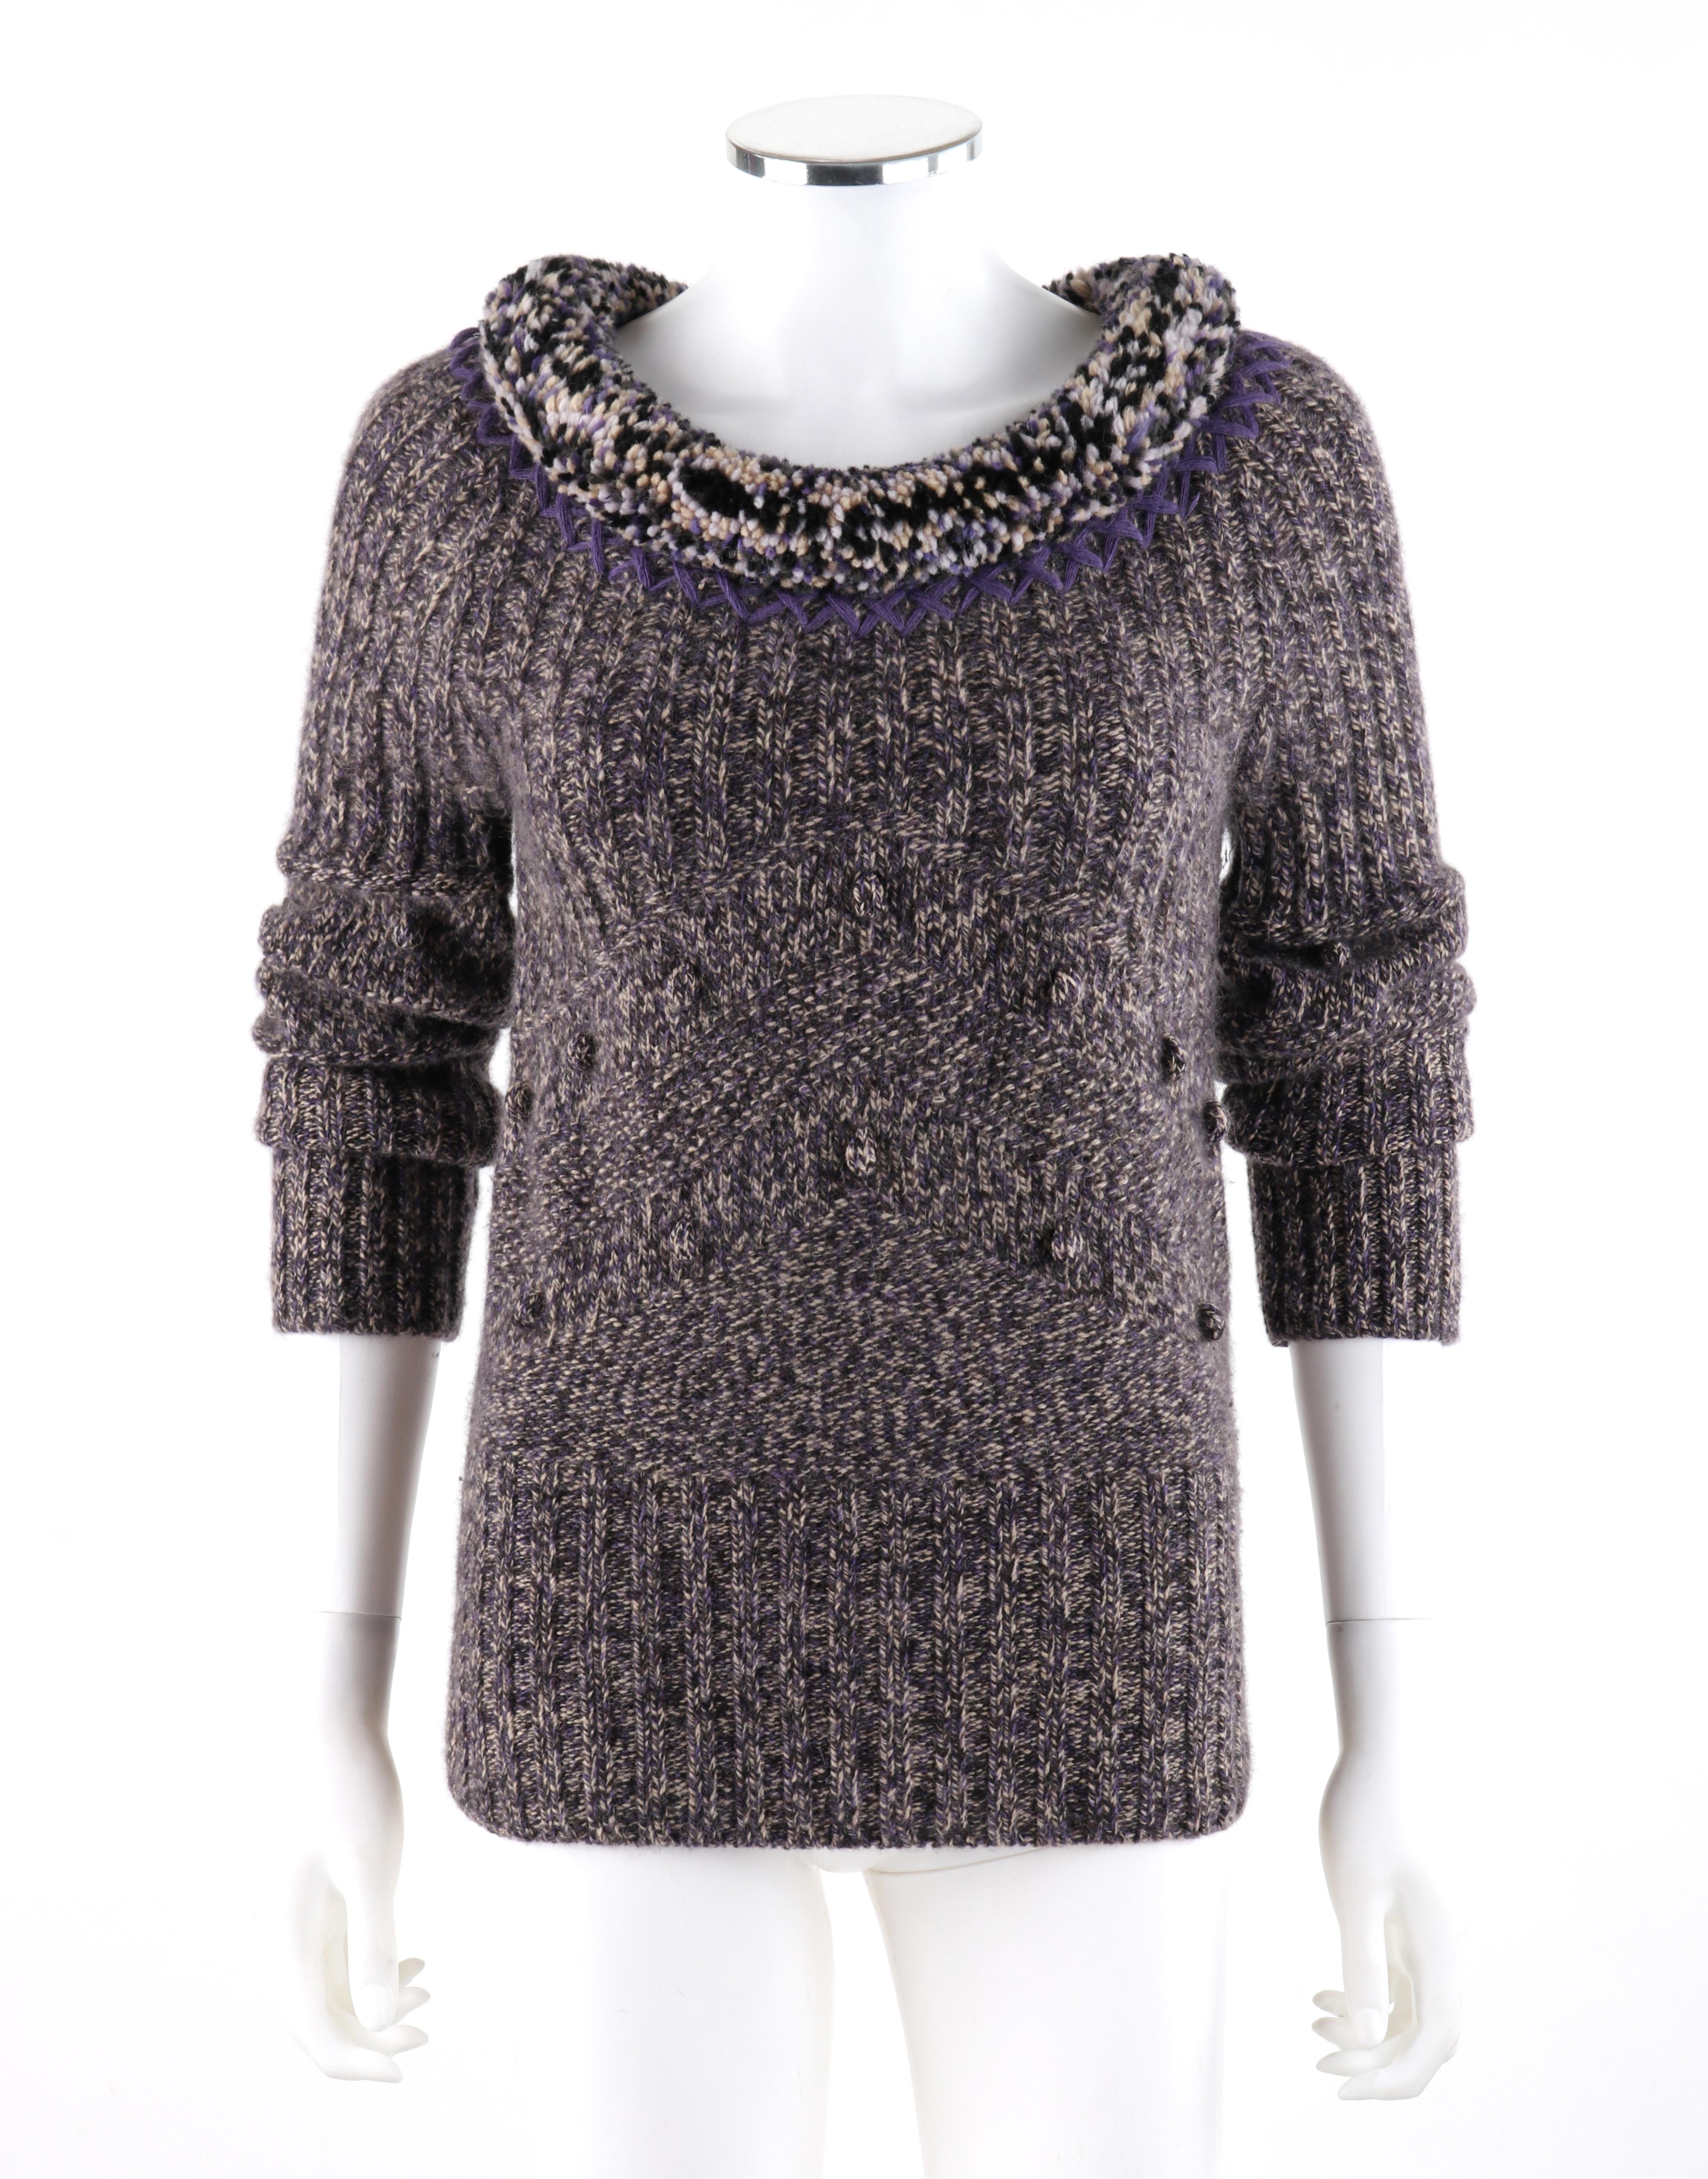 ALEXANDER McQUEEN A/W 2005 Scoop Neck Jumper Sweater With Pompom & Fringe Collar

Brand / Manufacturer: Alexander McQueen
Collection: A/W 2005
Designer: Alexander McQueen
Style: Scoop neck knit sweater with tall cuffed magyar sleeves
Color(s):